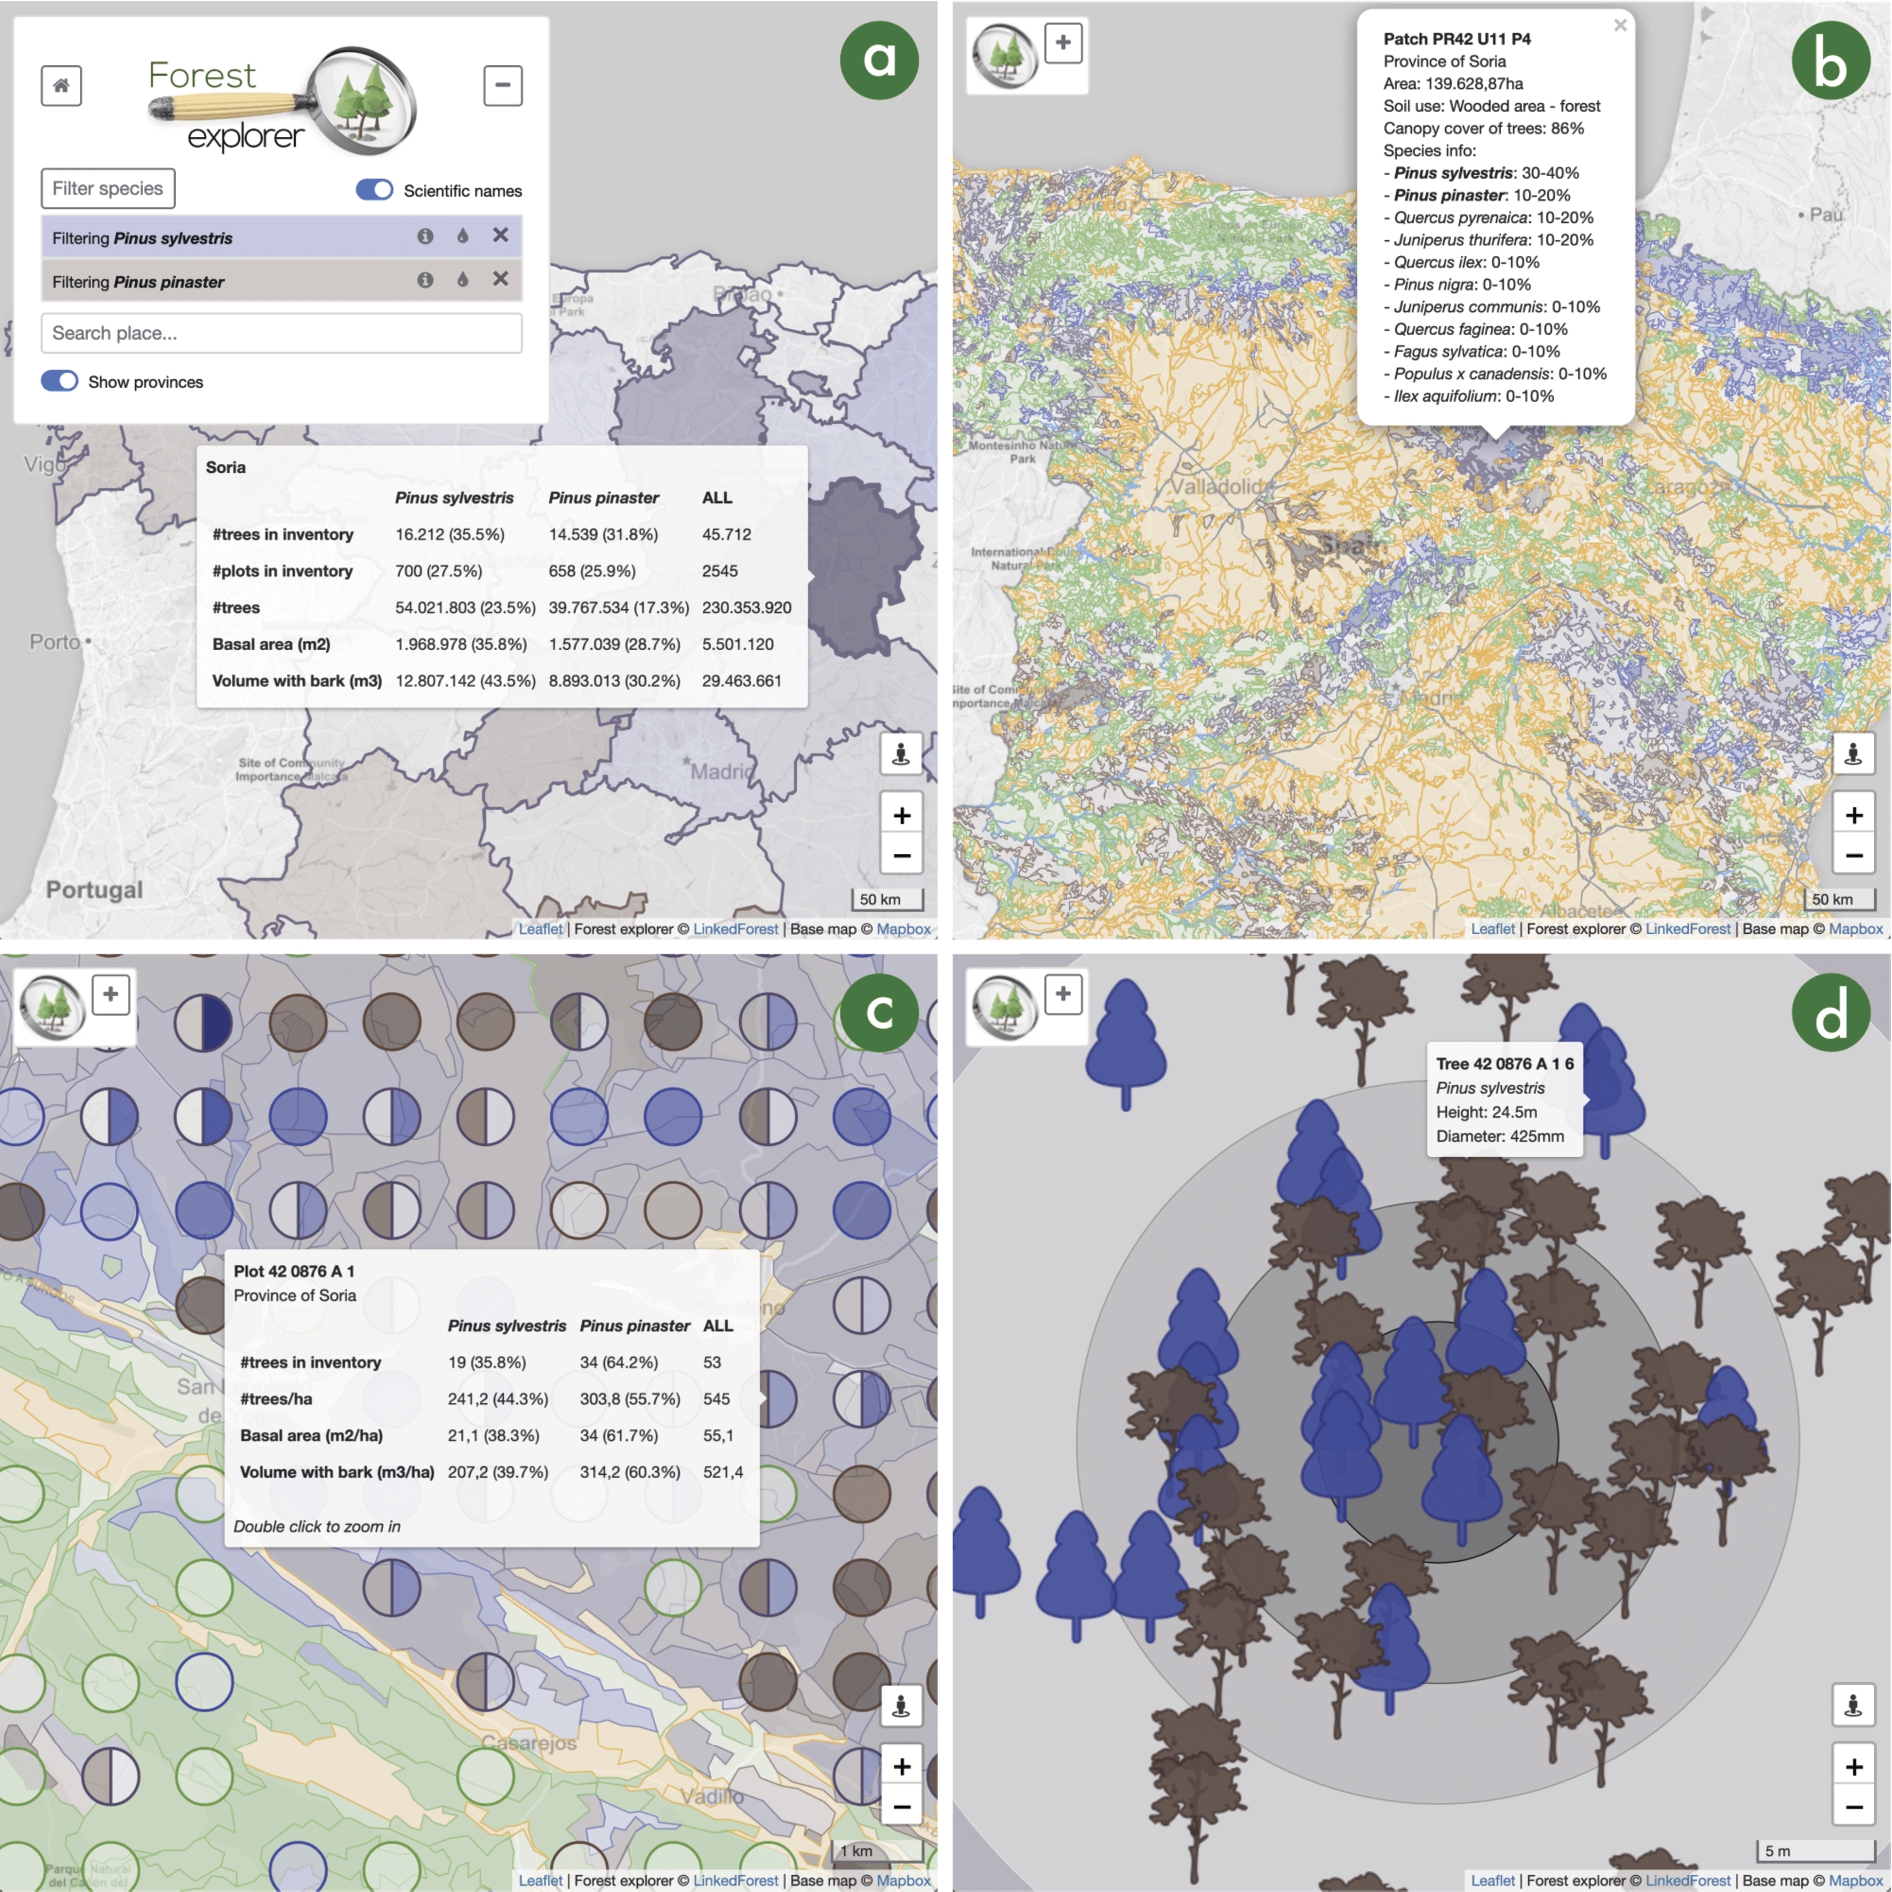 Snapshots of the user interface of Forest Explorer. (a) View of the Spanish provinces in a large area (see the map scale in the lower-right corner) with the form in the upper-left part expanded and showing two species filters, Pinus sylvestris in indigo color and Pinus pinaster in brown; inventory tree data for the province of Soria is displayed in a tooltip. (b) View of the patches in a large area of Spain with the form in the upper-left part collapsed; patches are plotted in different colors depending on their use (farms in orange, water in blue, artificial in grey, and forests in green); forest patches containing a filtered species use the color filter (indigo and brown in this running example); a pop-up shows the data of a forest patch in the province of Soria. (c) View of a small forest area (see the map scale in the lower-right corner) in the province of Soria; plots are displayed as circles on top of the patches; plots and patches employ the same color code as before; a tooltip shows inventory data for a plot. (d) View of a tiny small forest area corresponding to the center of a plot in Soria; tree markers are shown in their actual positions using taxa-dependent icons and corresponding filter colors; a tooltip shows the species, height, and diameter of a specific tree.